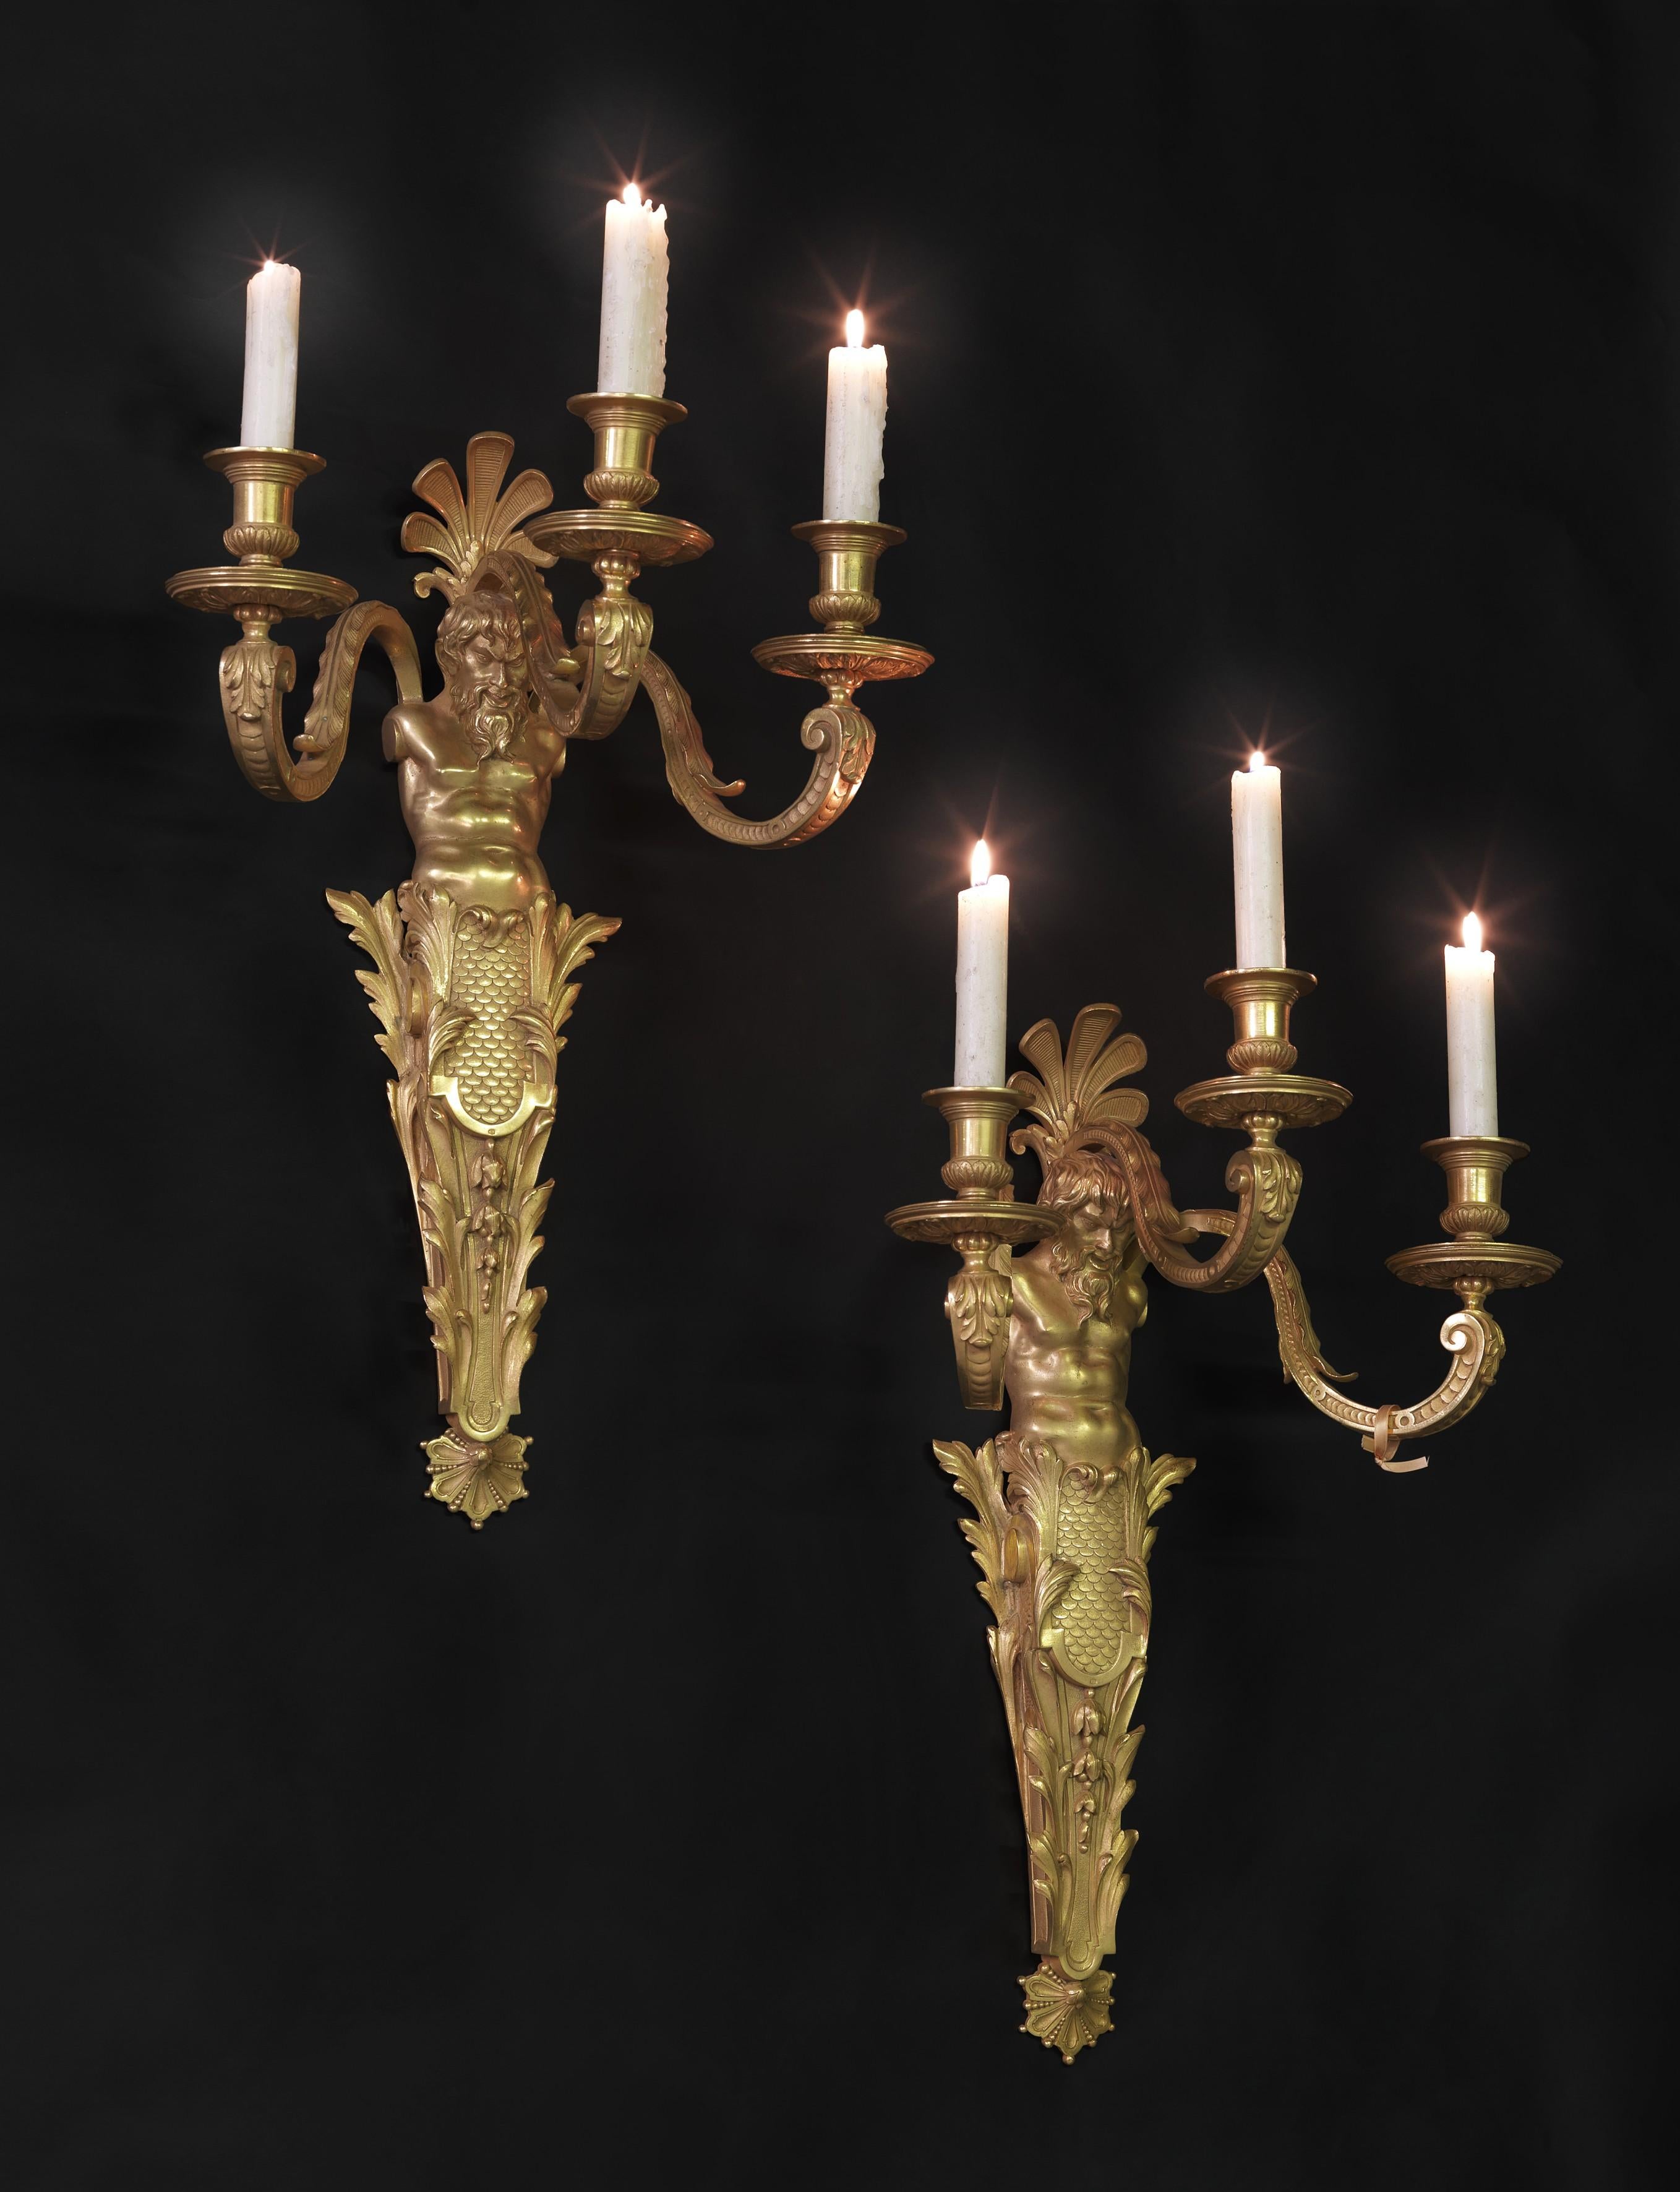 A Fine Pair of Gilt-Bronze Three-Light Wall-Appliques by Henry Dasson.

French, Circa 1880. 

Stamped to the bronze 'HD' in an oval medallion.

This fine pair of gilt-bronze appliqués each have a central herm figure issuing three candle branches